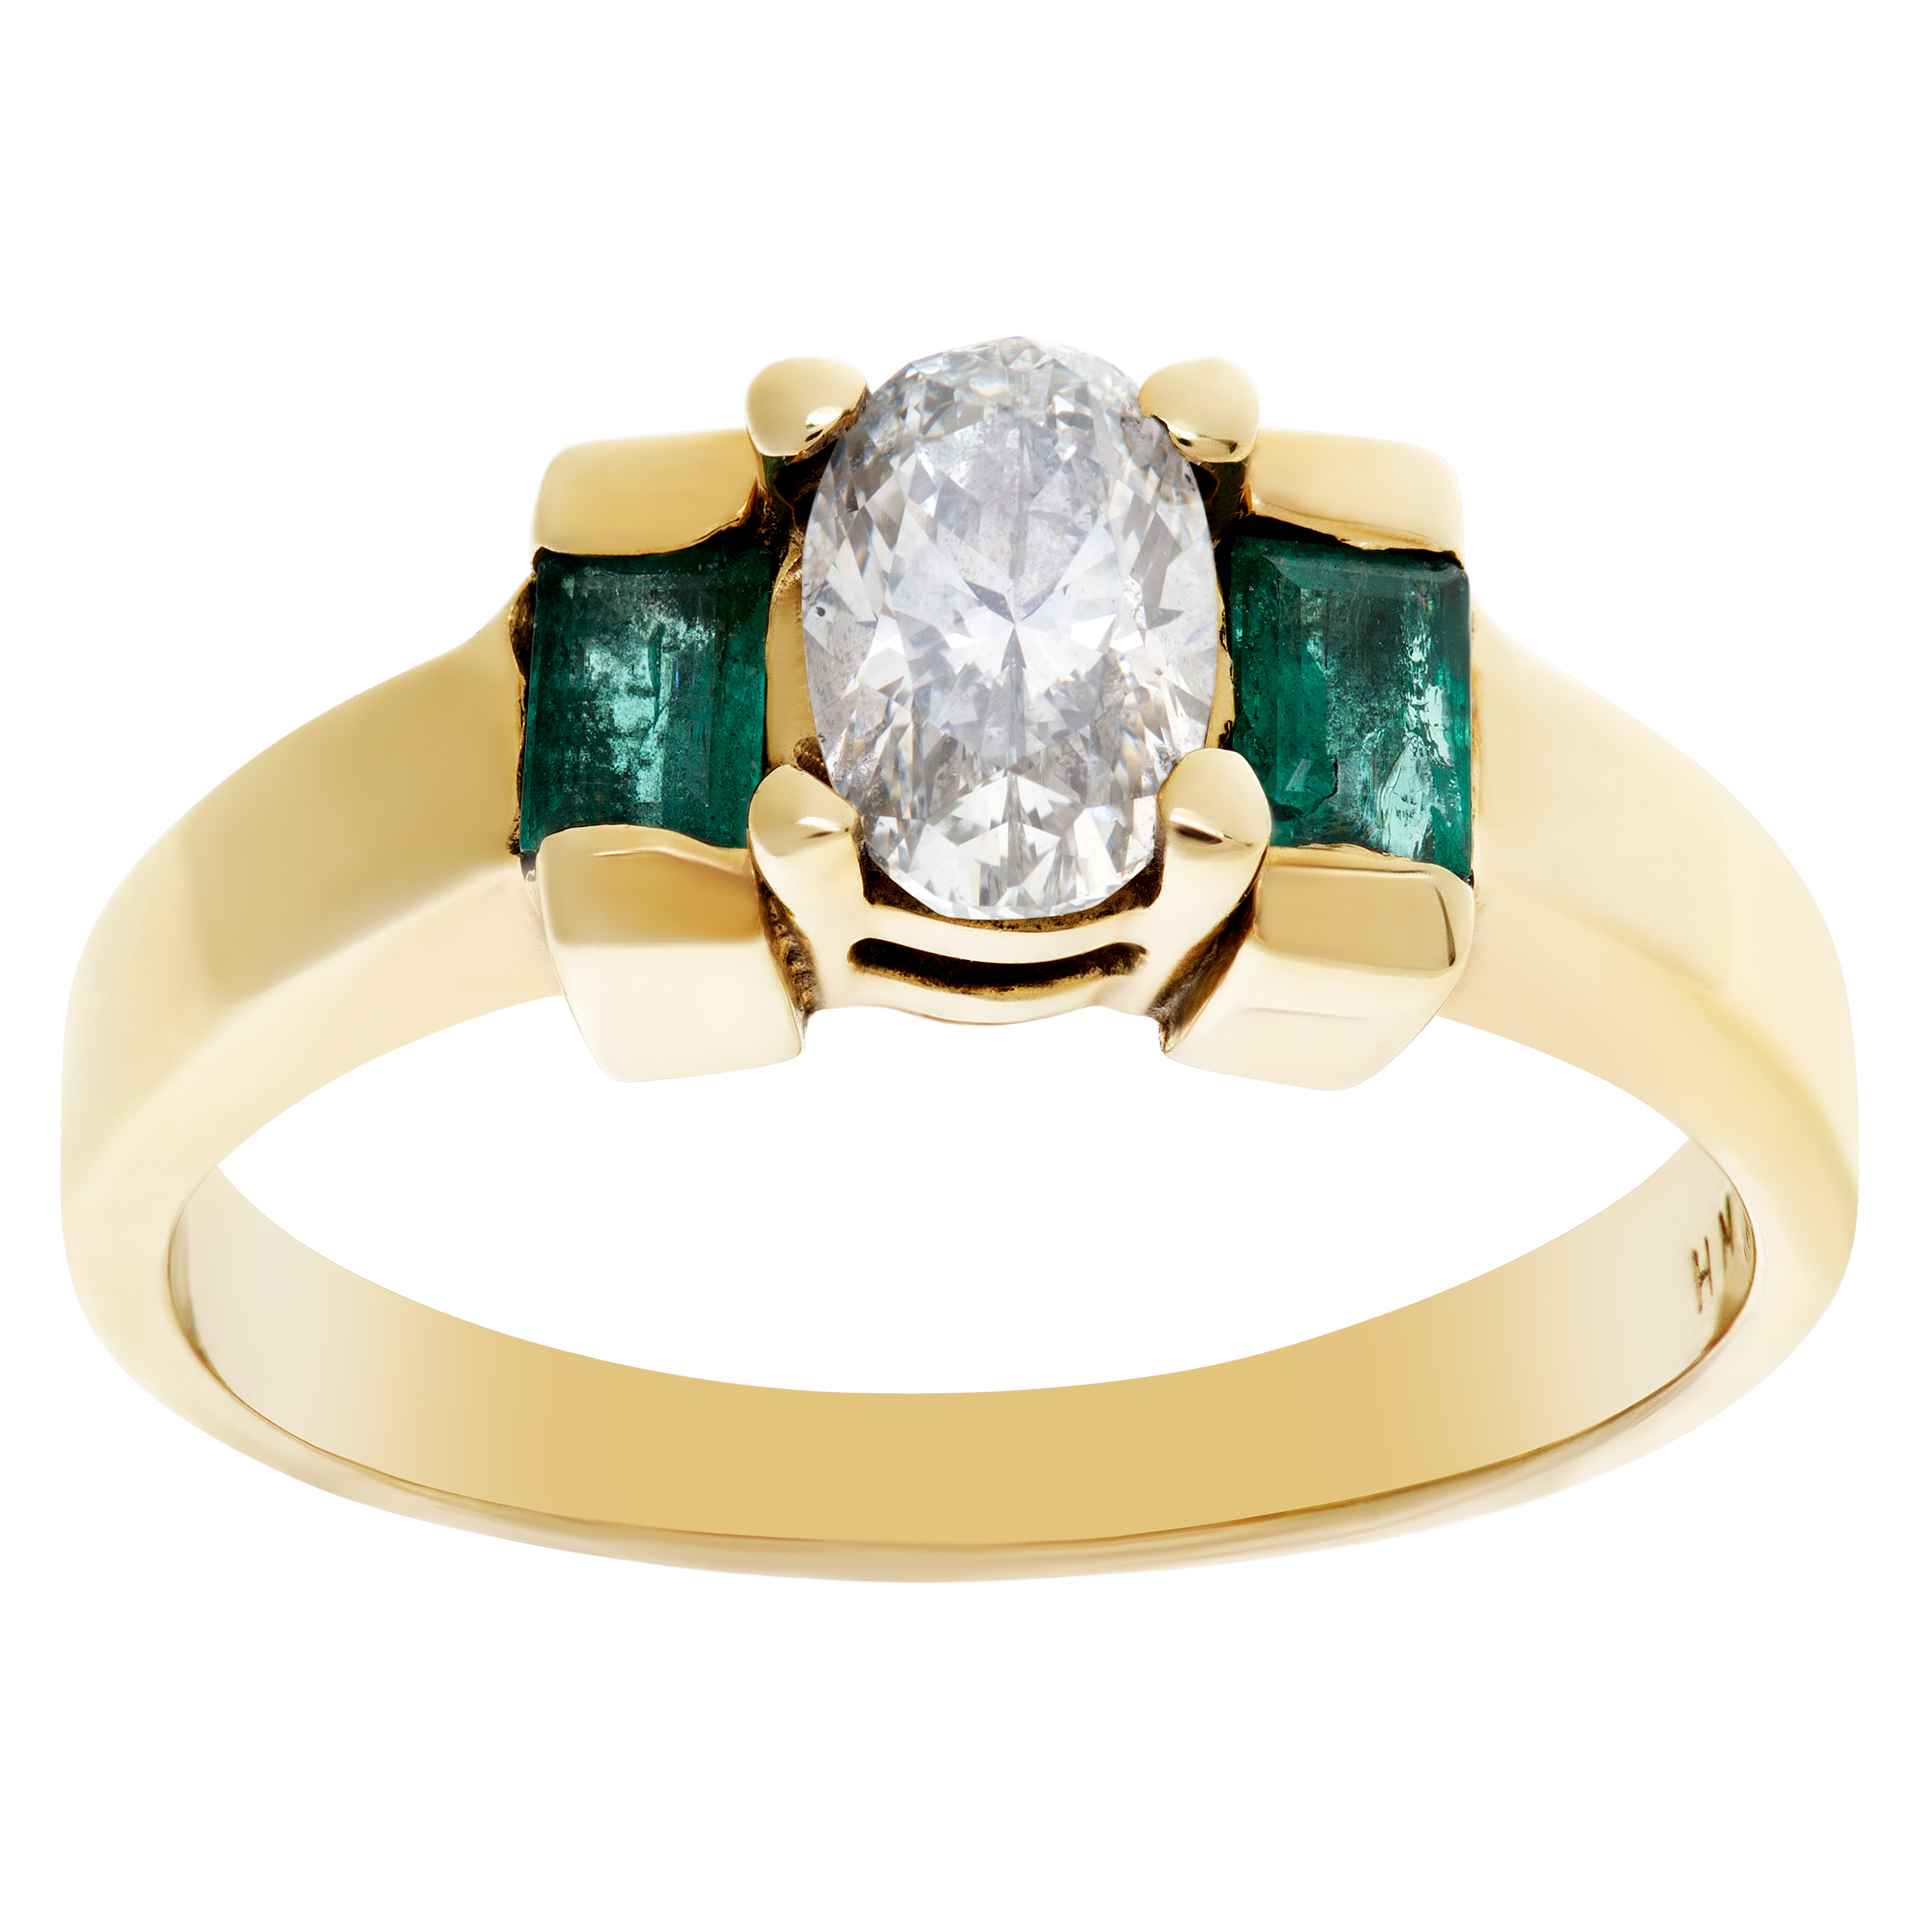 Adorable diamond and emerald ring in 14k. 0.50cts oval diamond (H-I, VS2)